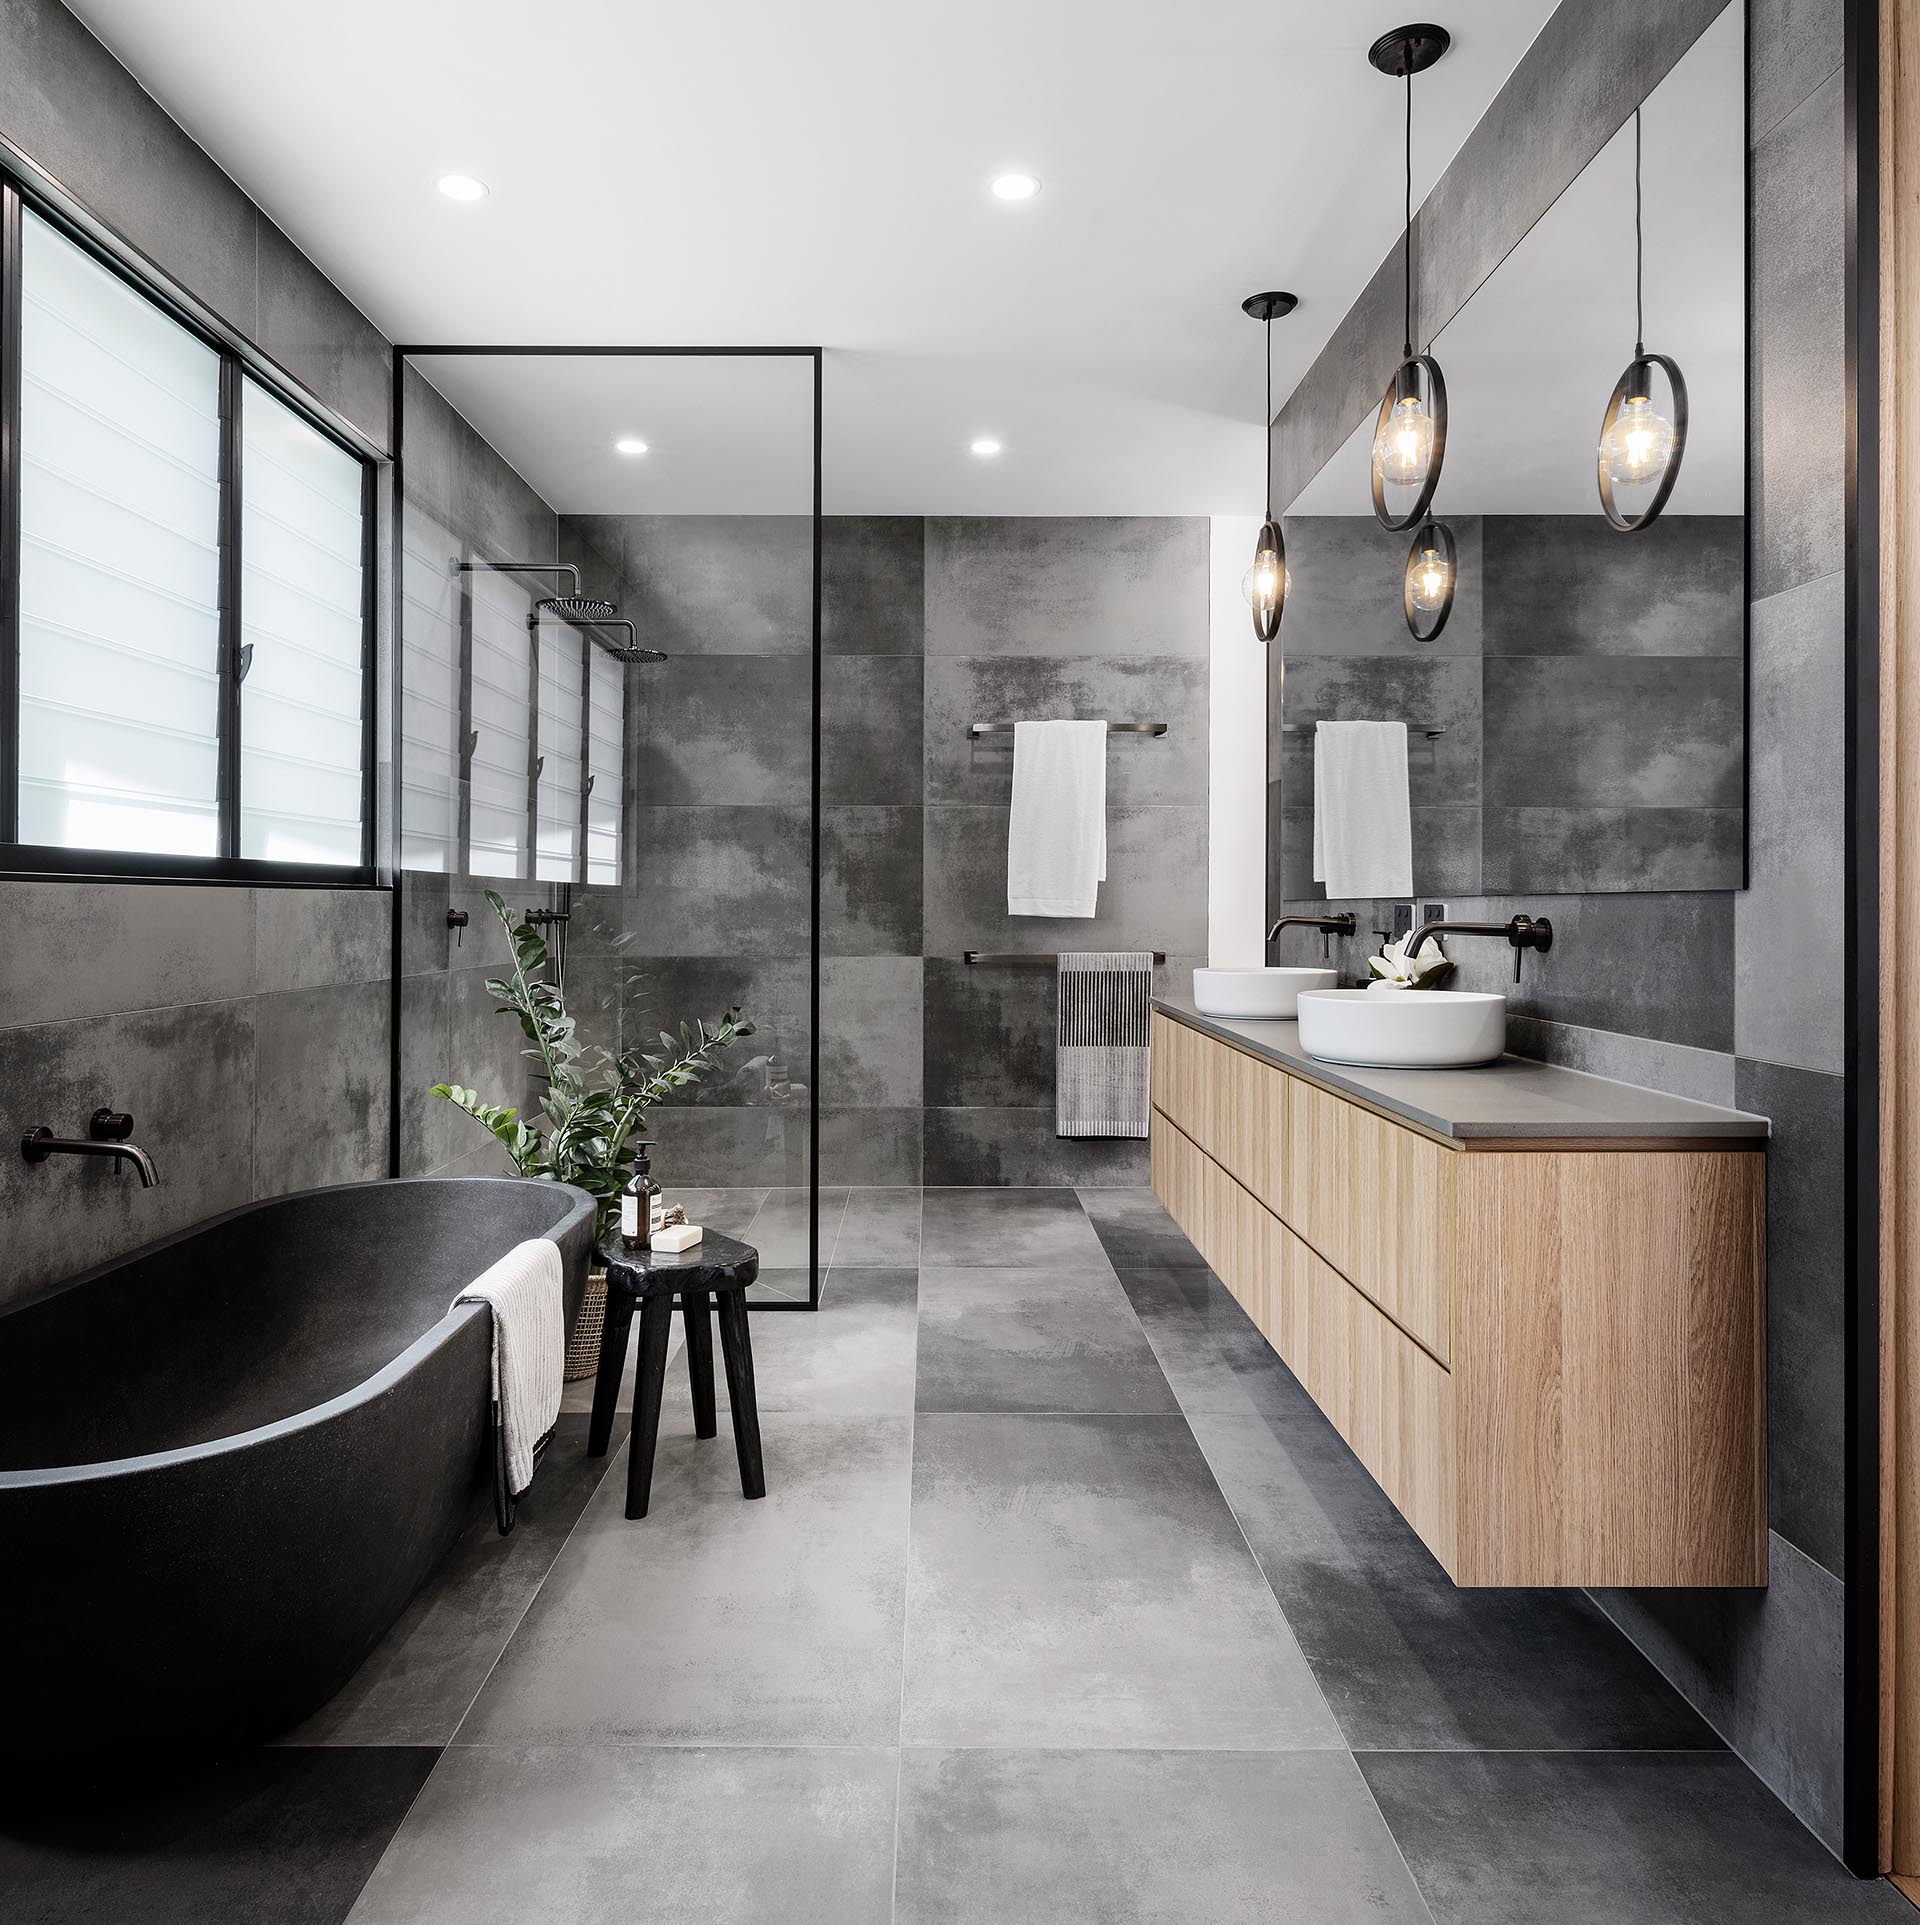 A Cloudy Grey Tile Sets The Palette For This Bathroom